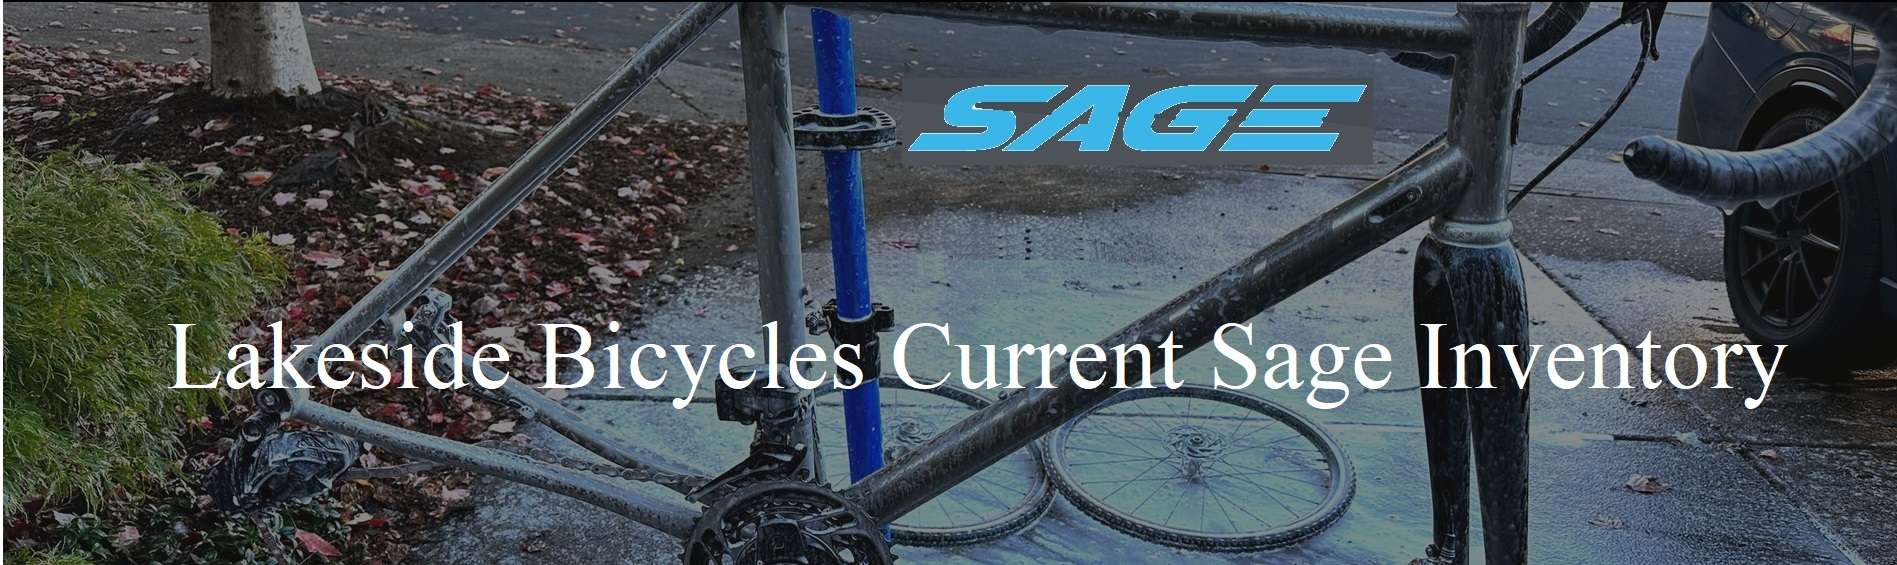 Lakeside Bicycles Current Sage Inventory